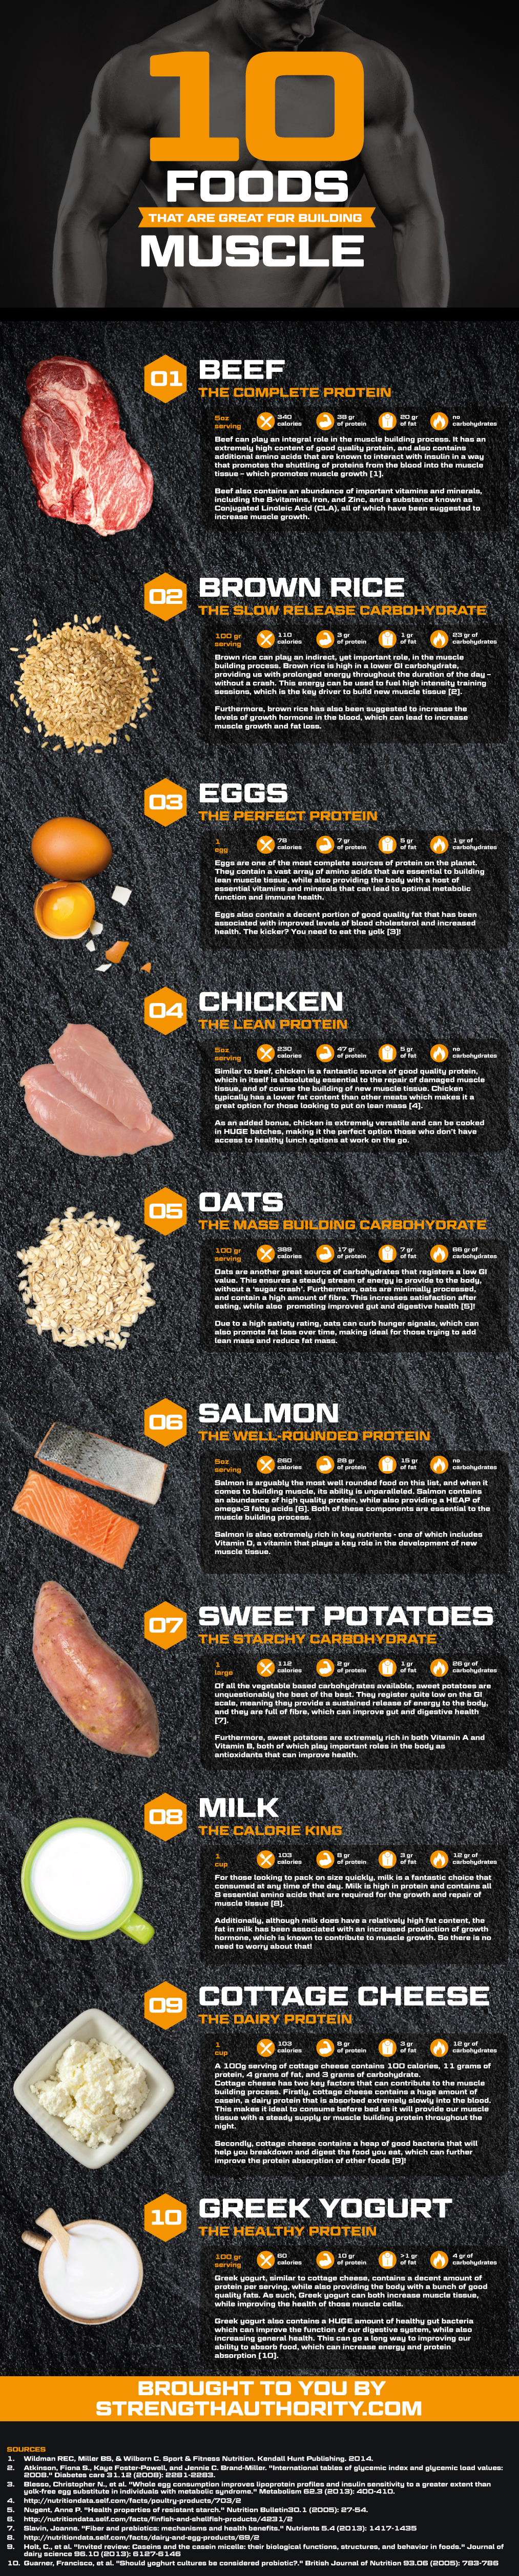 Top 10 Muscle-Building Foods For Your Workout Diet Infographic